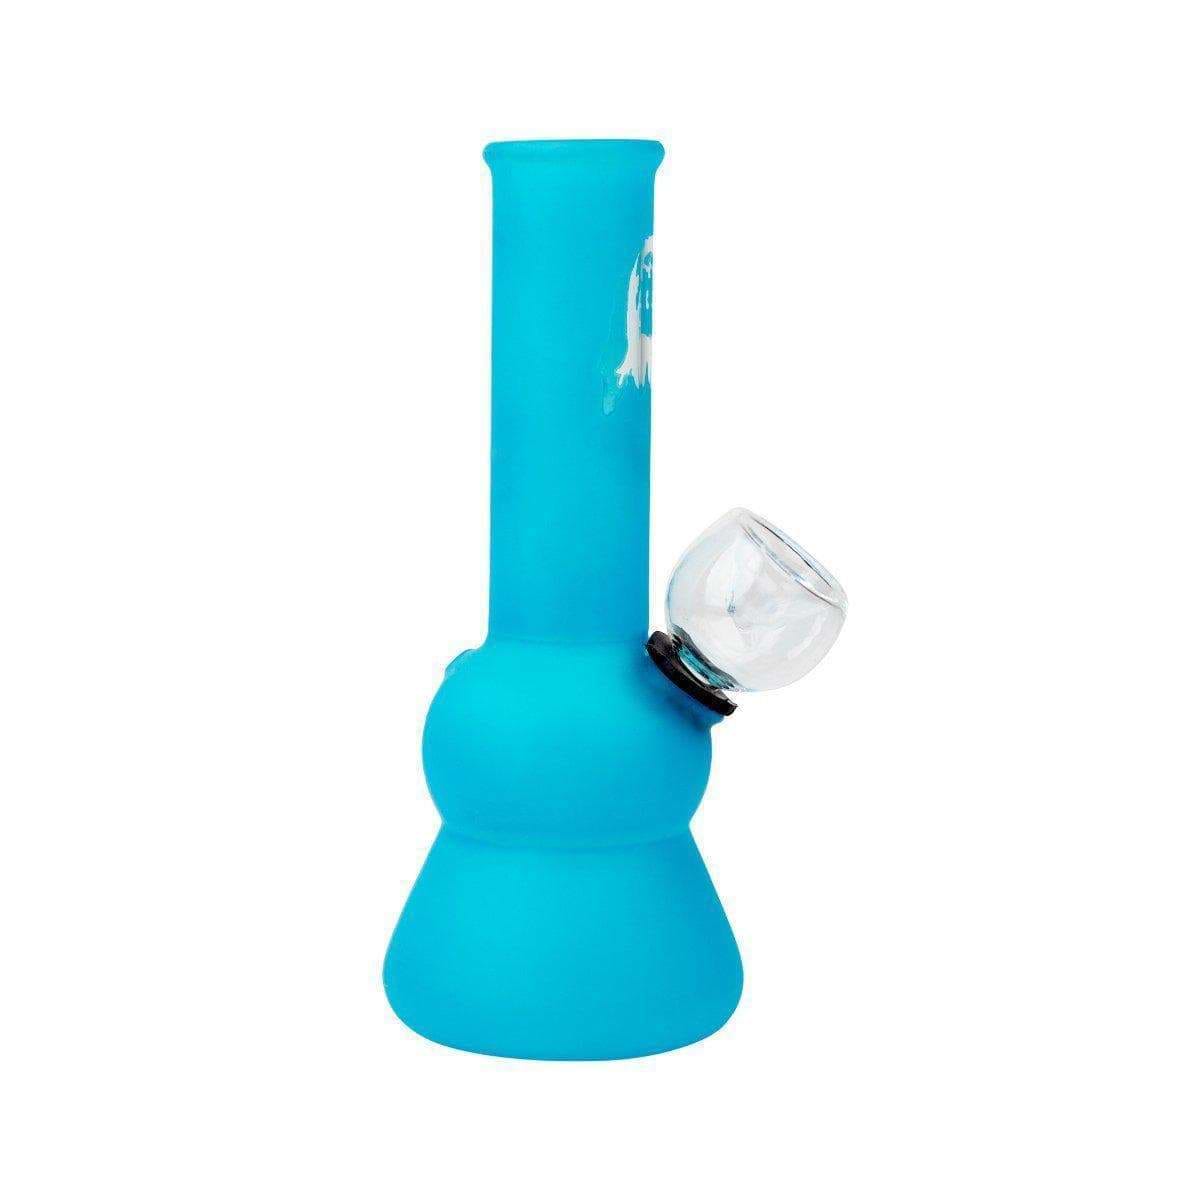 5-inch teal glass carb bong smoking device bright solid color Bob Marley face sillhouette printed on neck